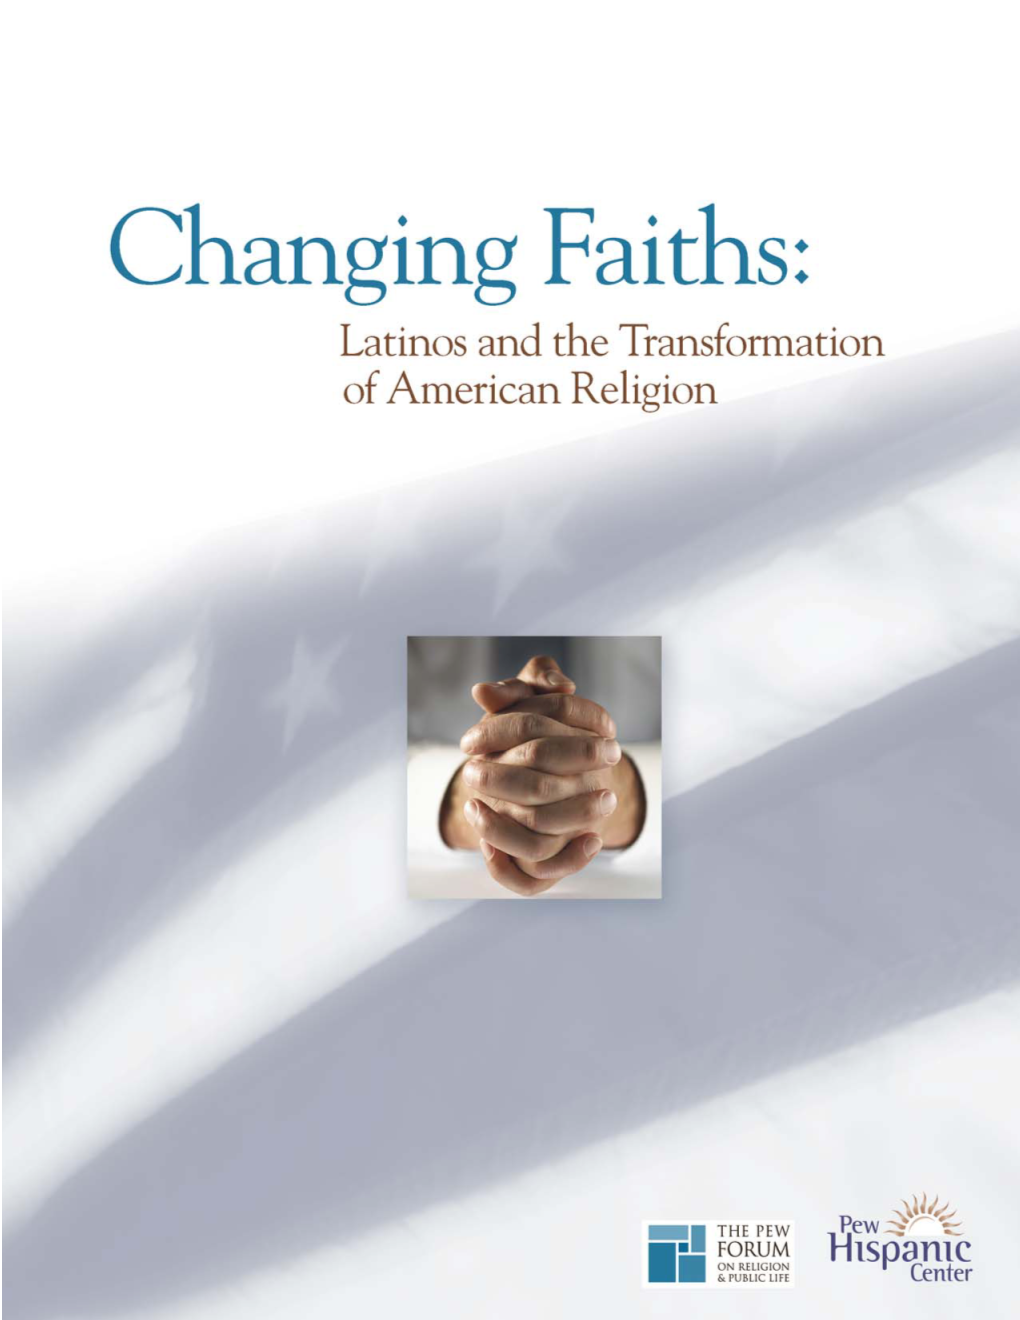 Changing Faiths: Latinos and the Transformation of American Religion